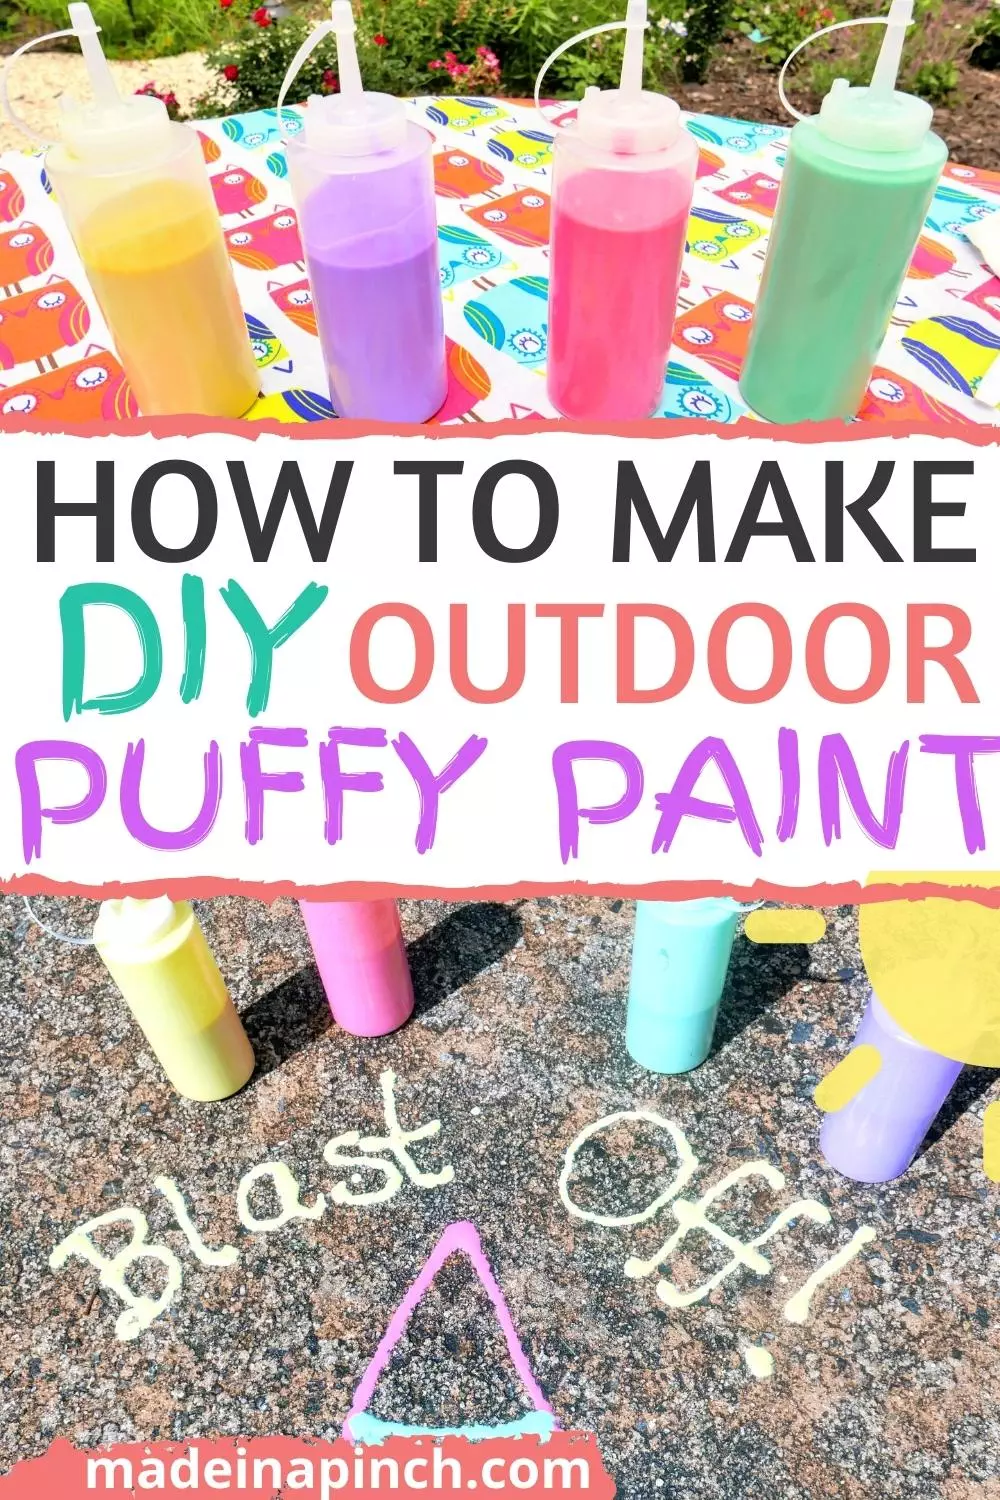 how to make DIY outdoor puffy paint